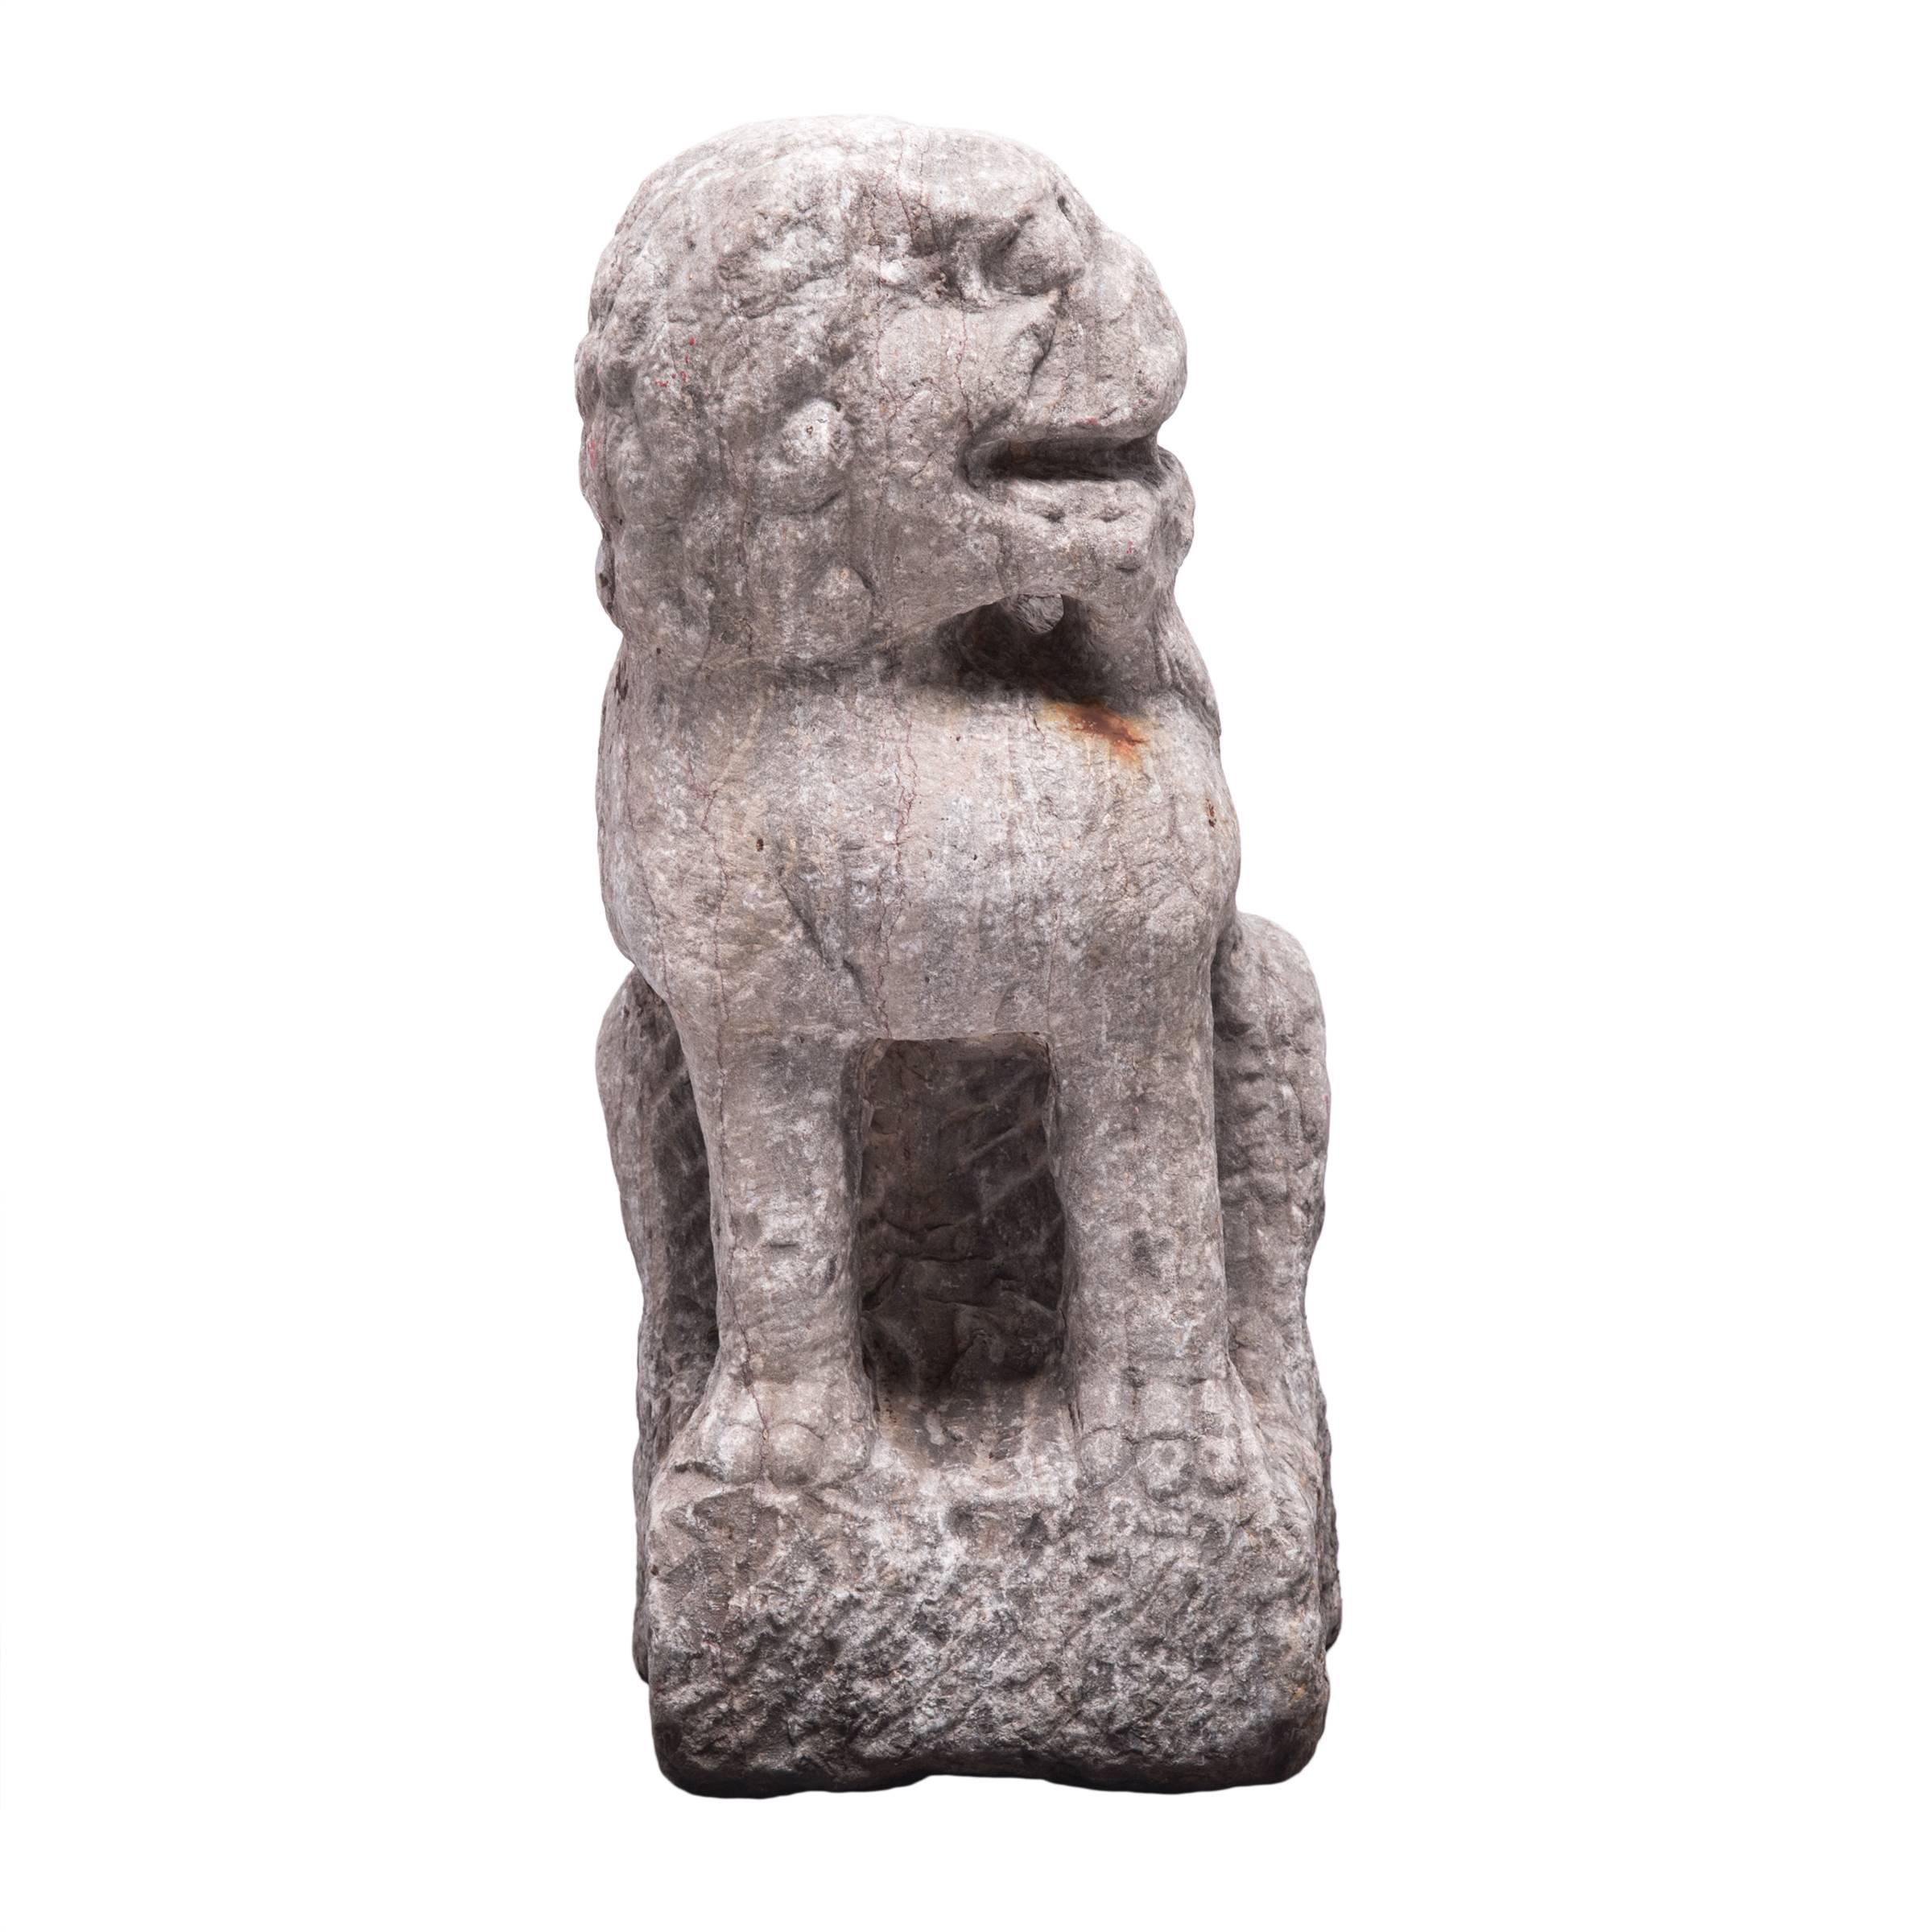 This early 18th century Shizi was carved by hand with a peaceful peering face from a single block of limestone. Shizi, meaning 